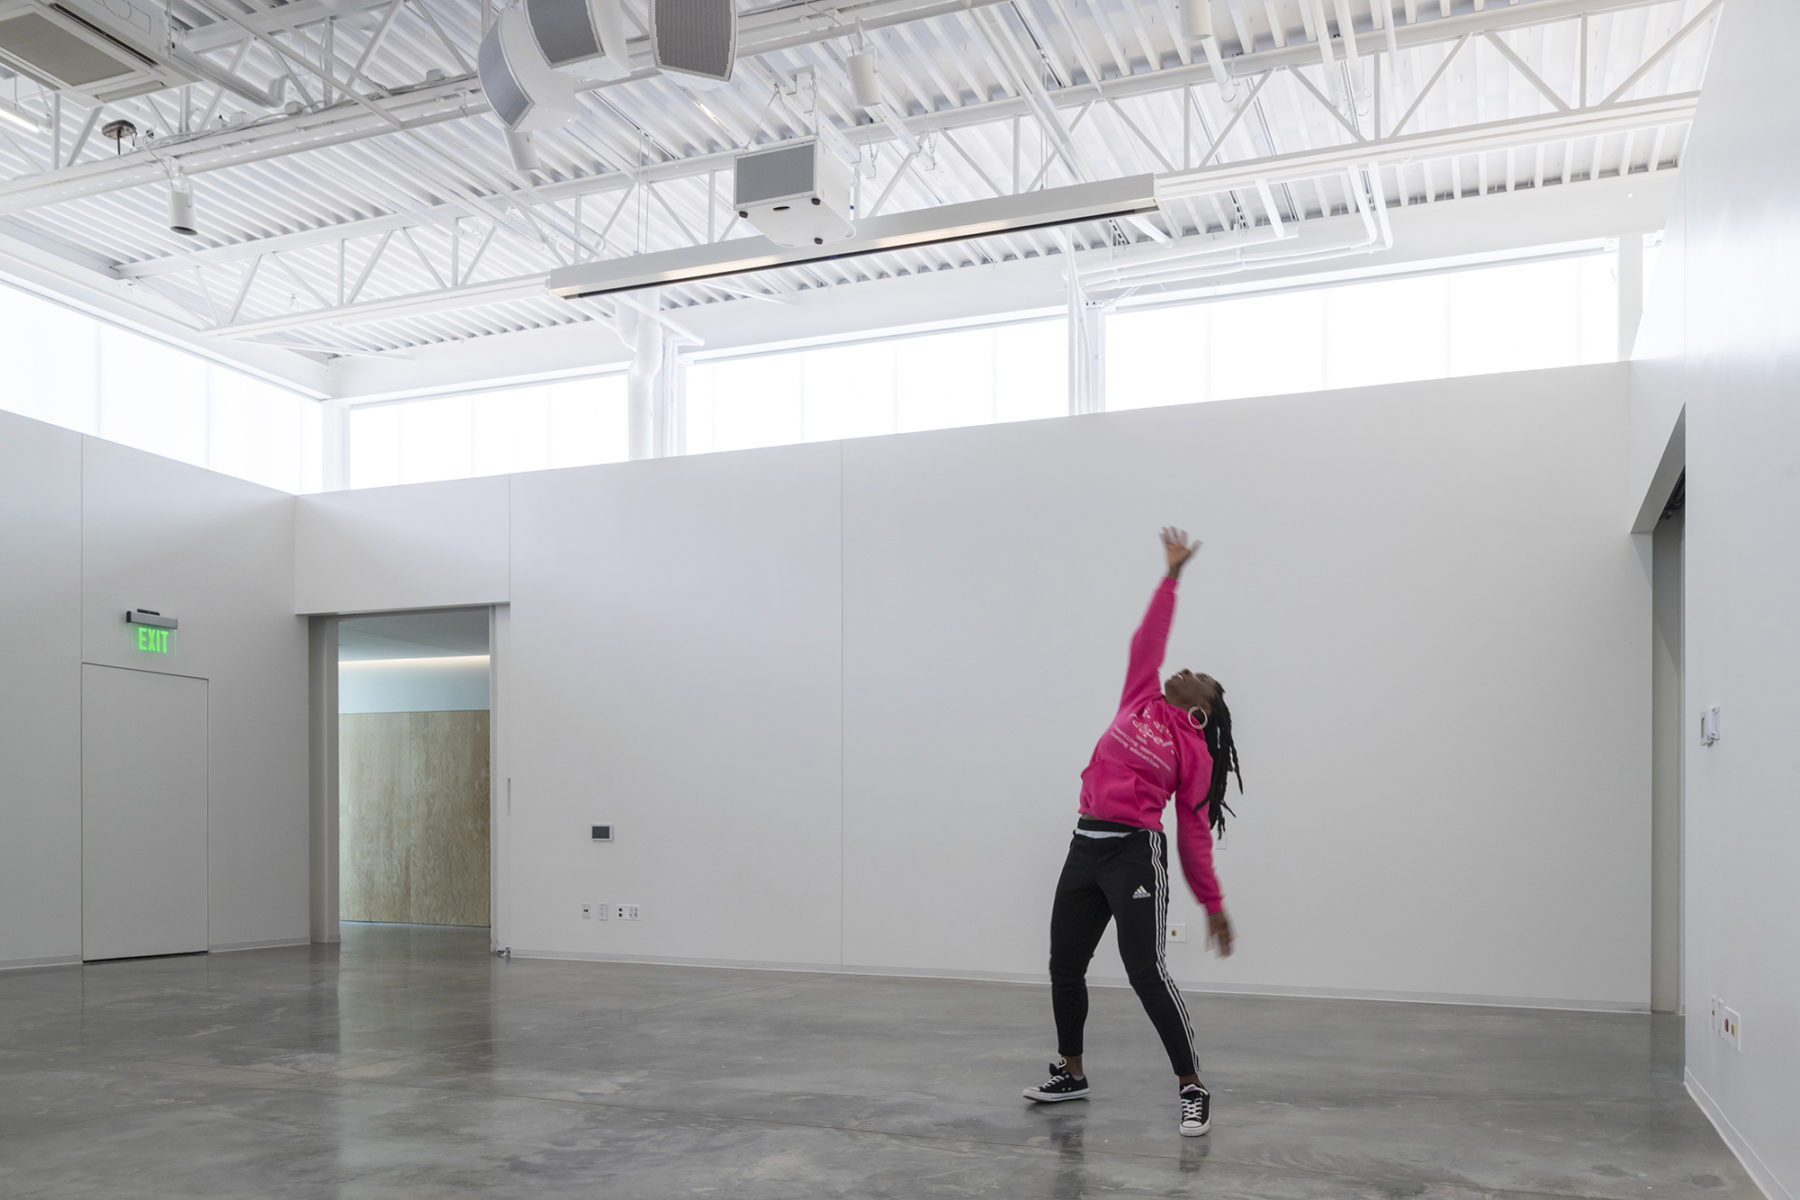 A performer showcases her talent in one of the gallery spaces